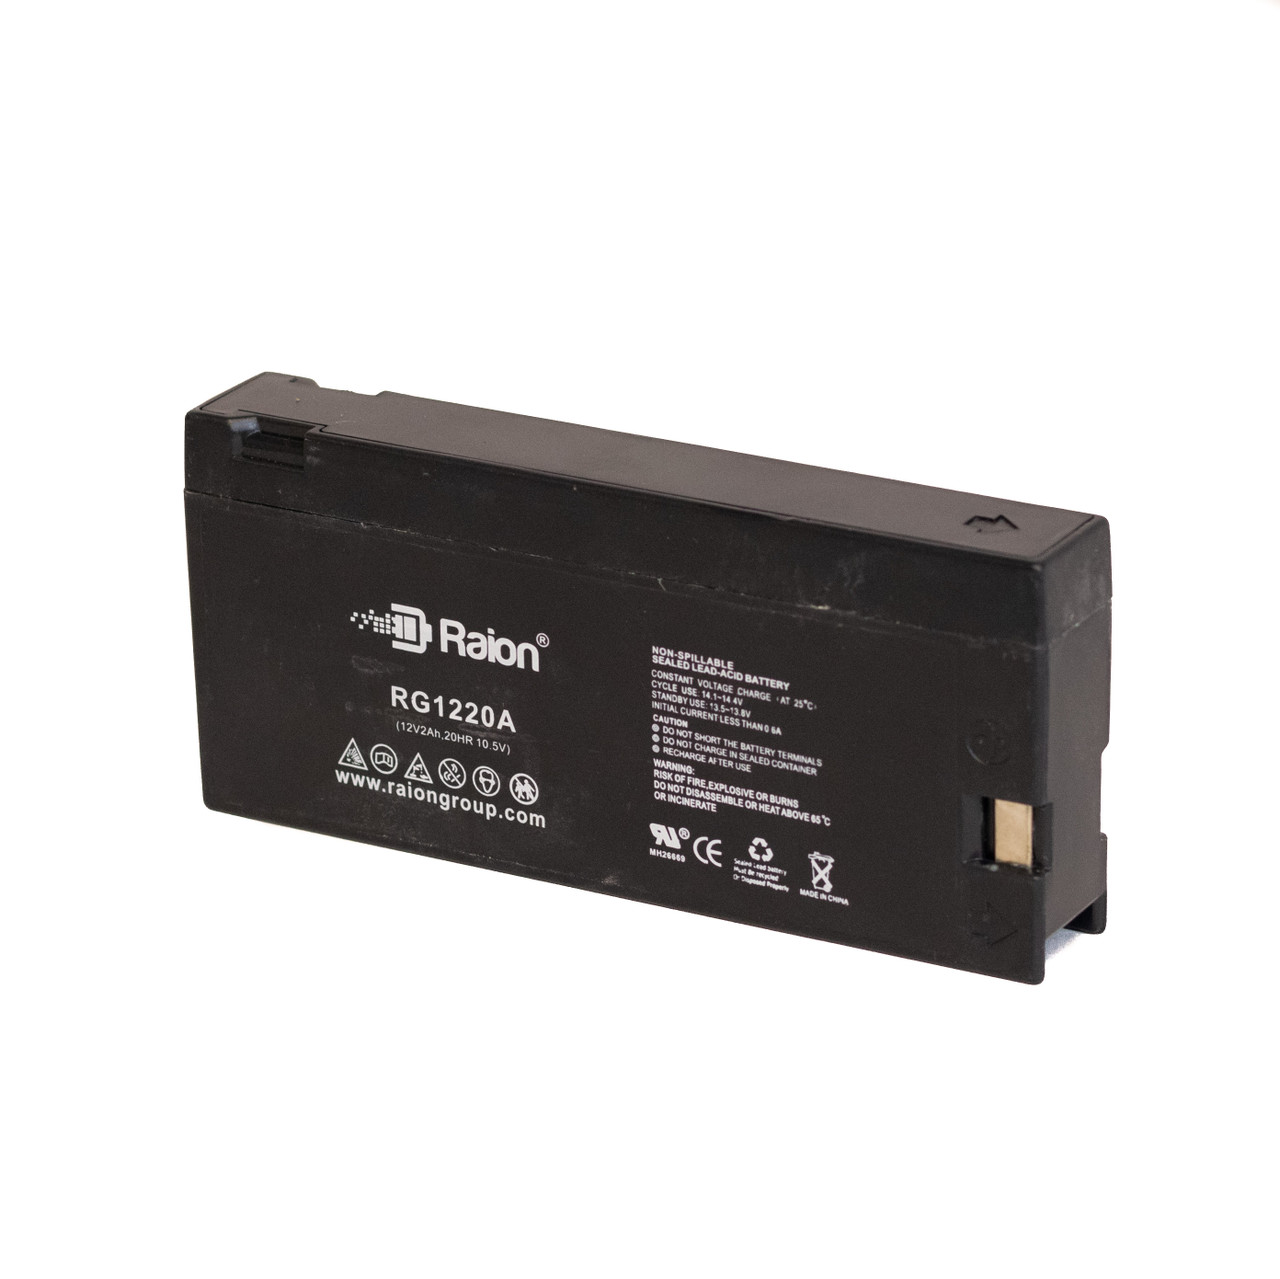 Raion Power RG1220A Replacement Battery for NEATA NT12-2.0